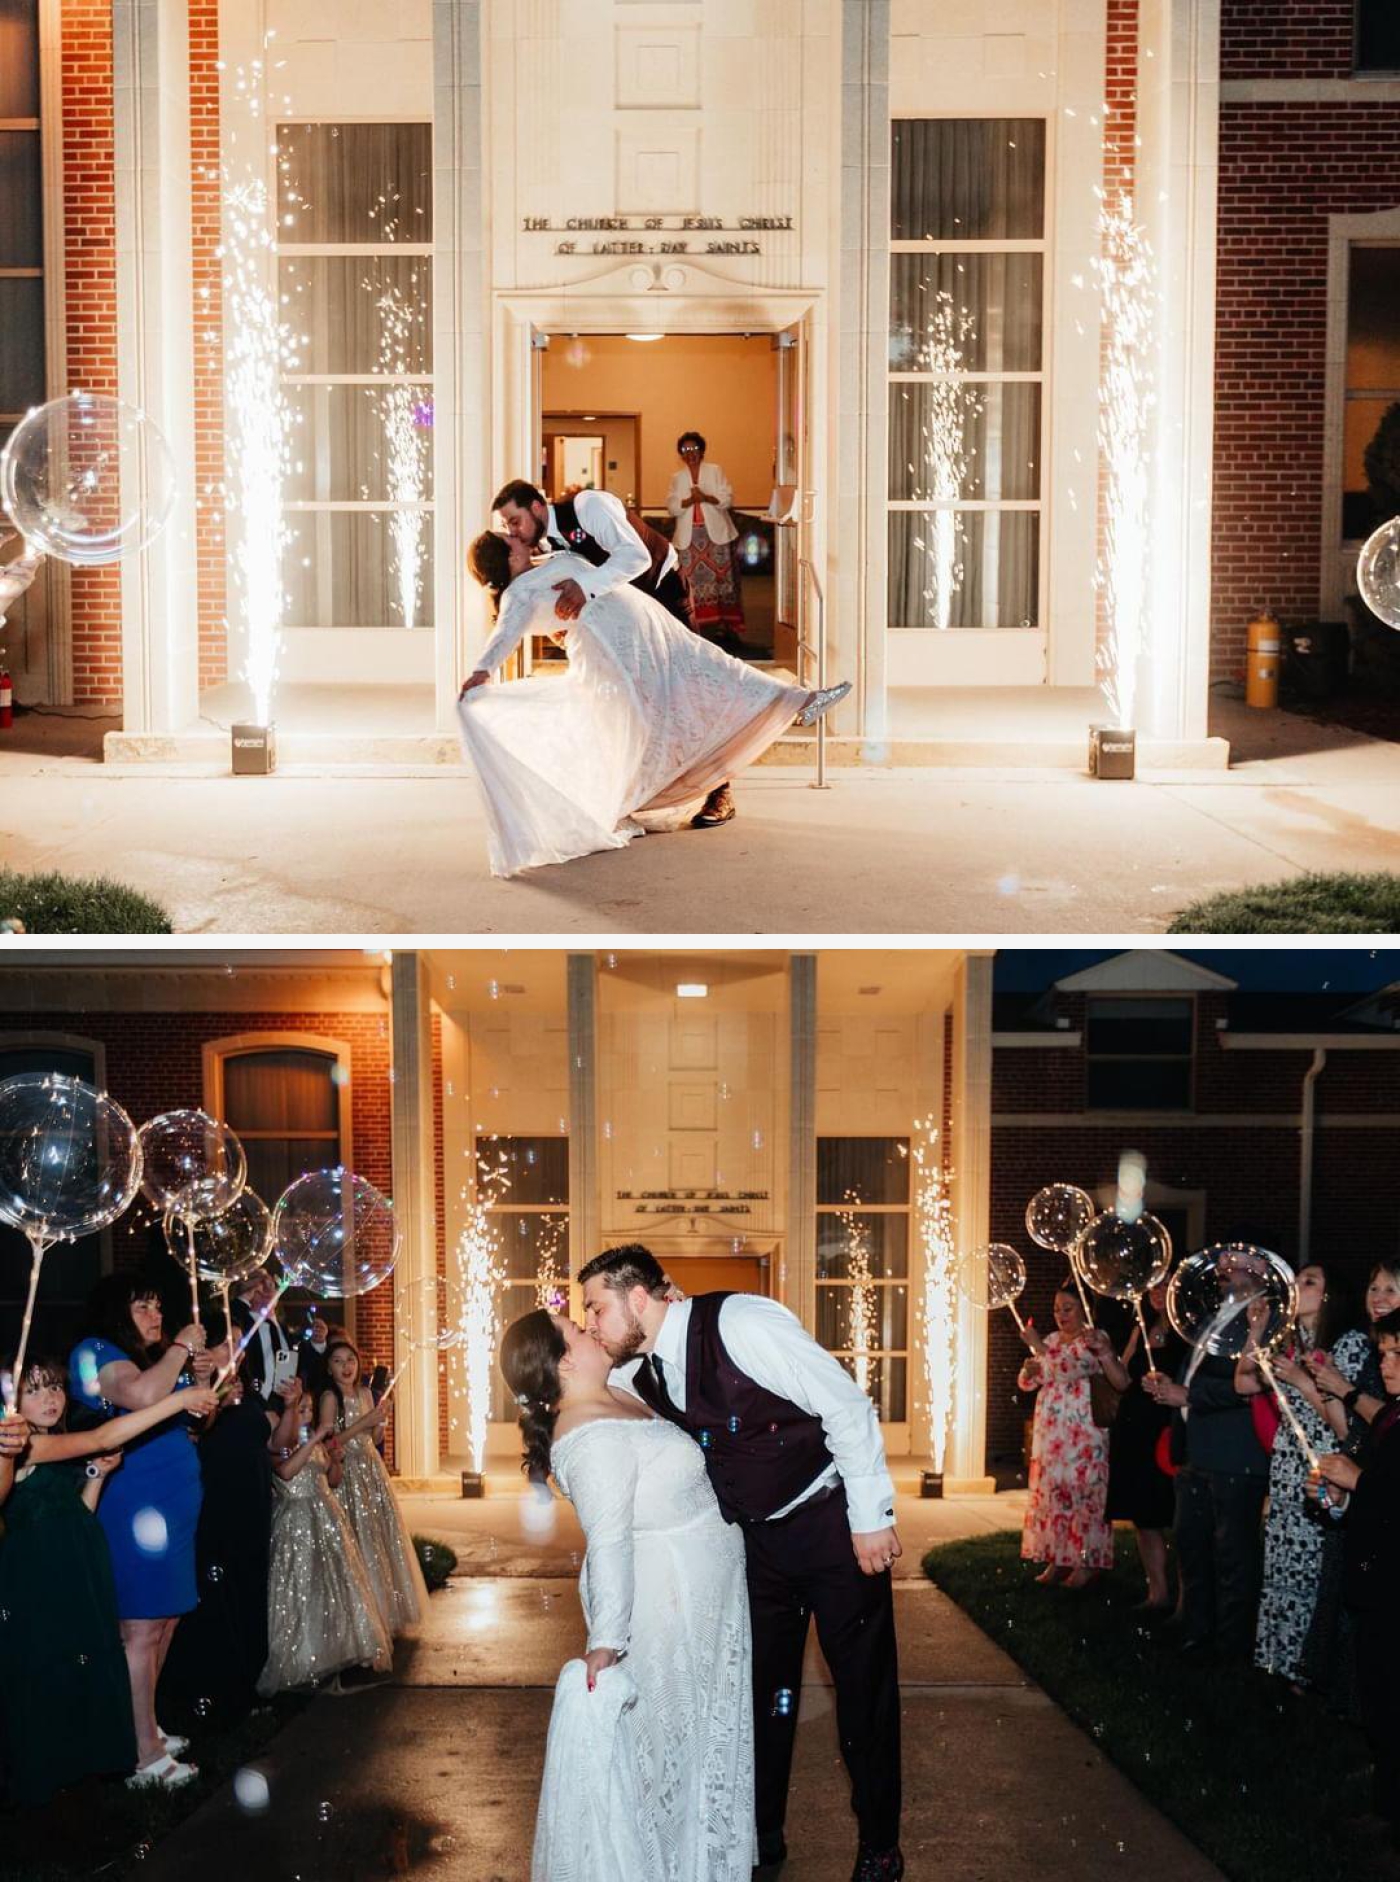 Couple exiting their wedding at the LDS church in Denver with cold sparklers and balloons.